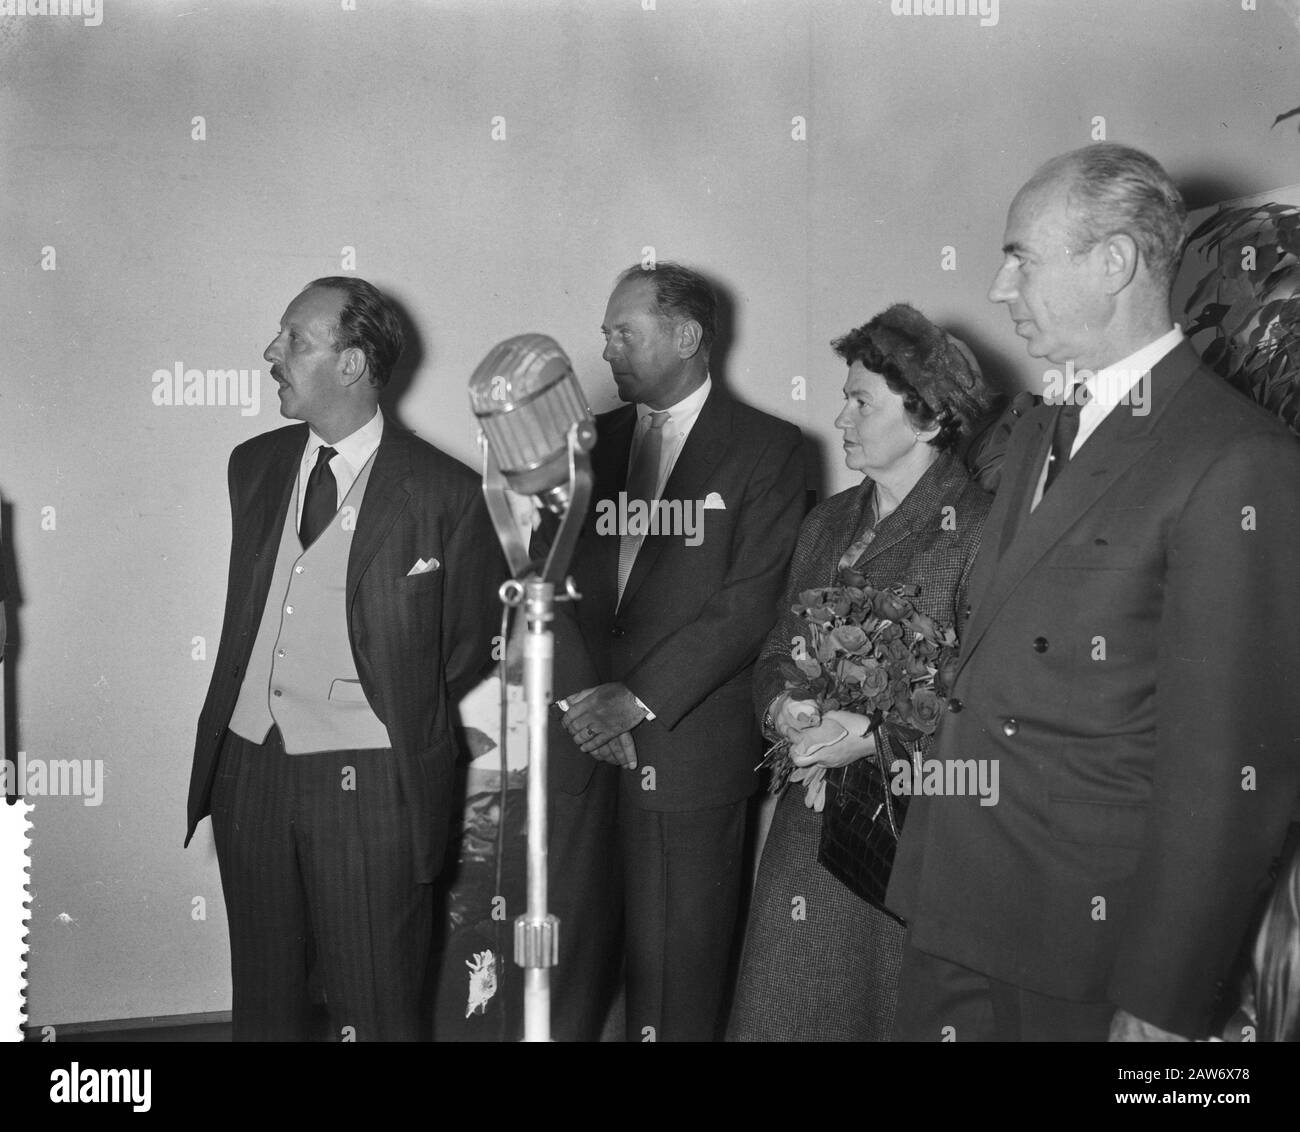 Opening exhibition Women of Israel by Ambassador Cidor ambassador HA Cidor during weaning Date: November 2, 1960 Keywords: openings, ambassadors, speeches, exhibitions Person Name: HA Cidor Institution Name : Israel Women Stock Photo